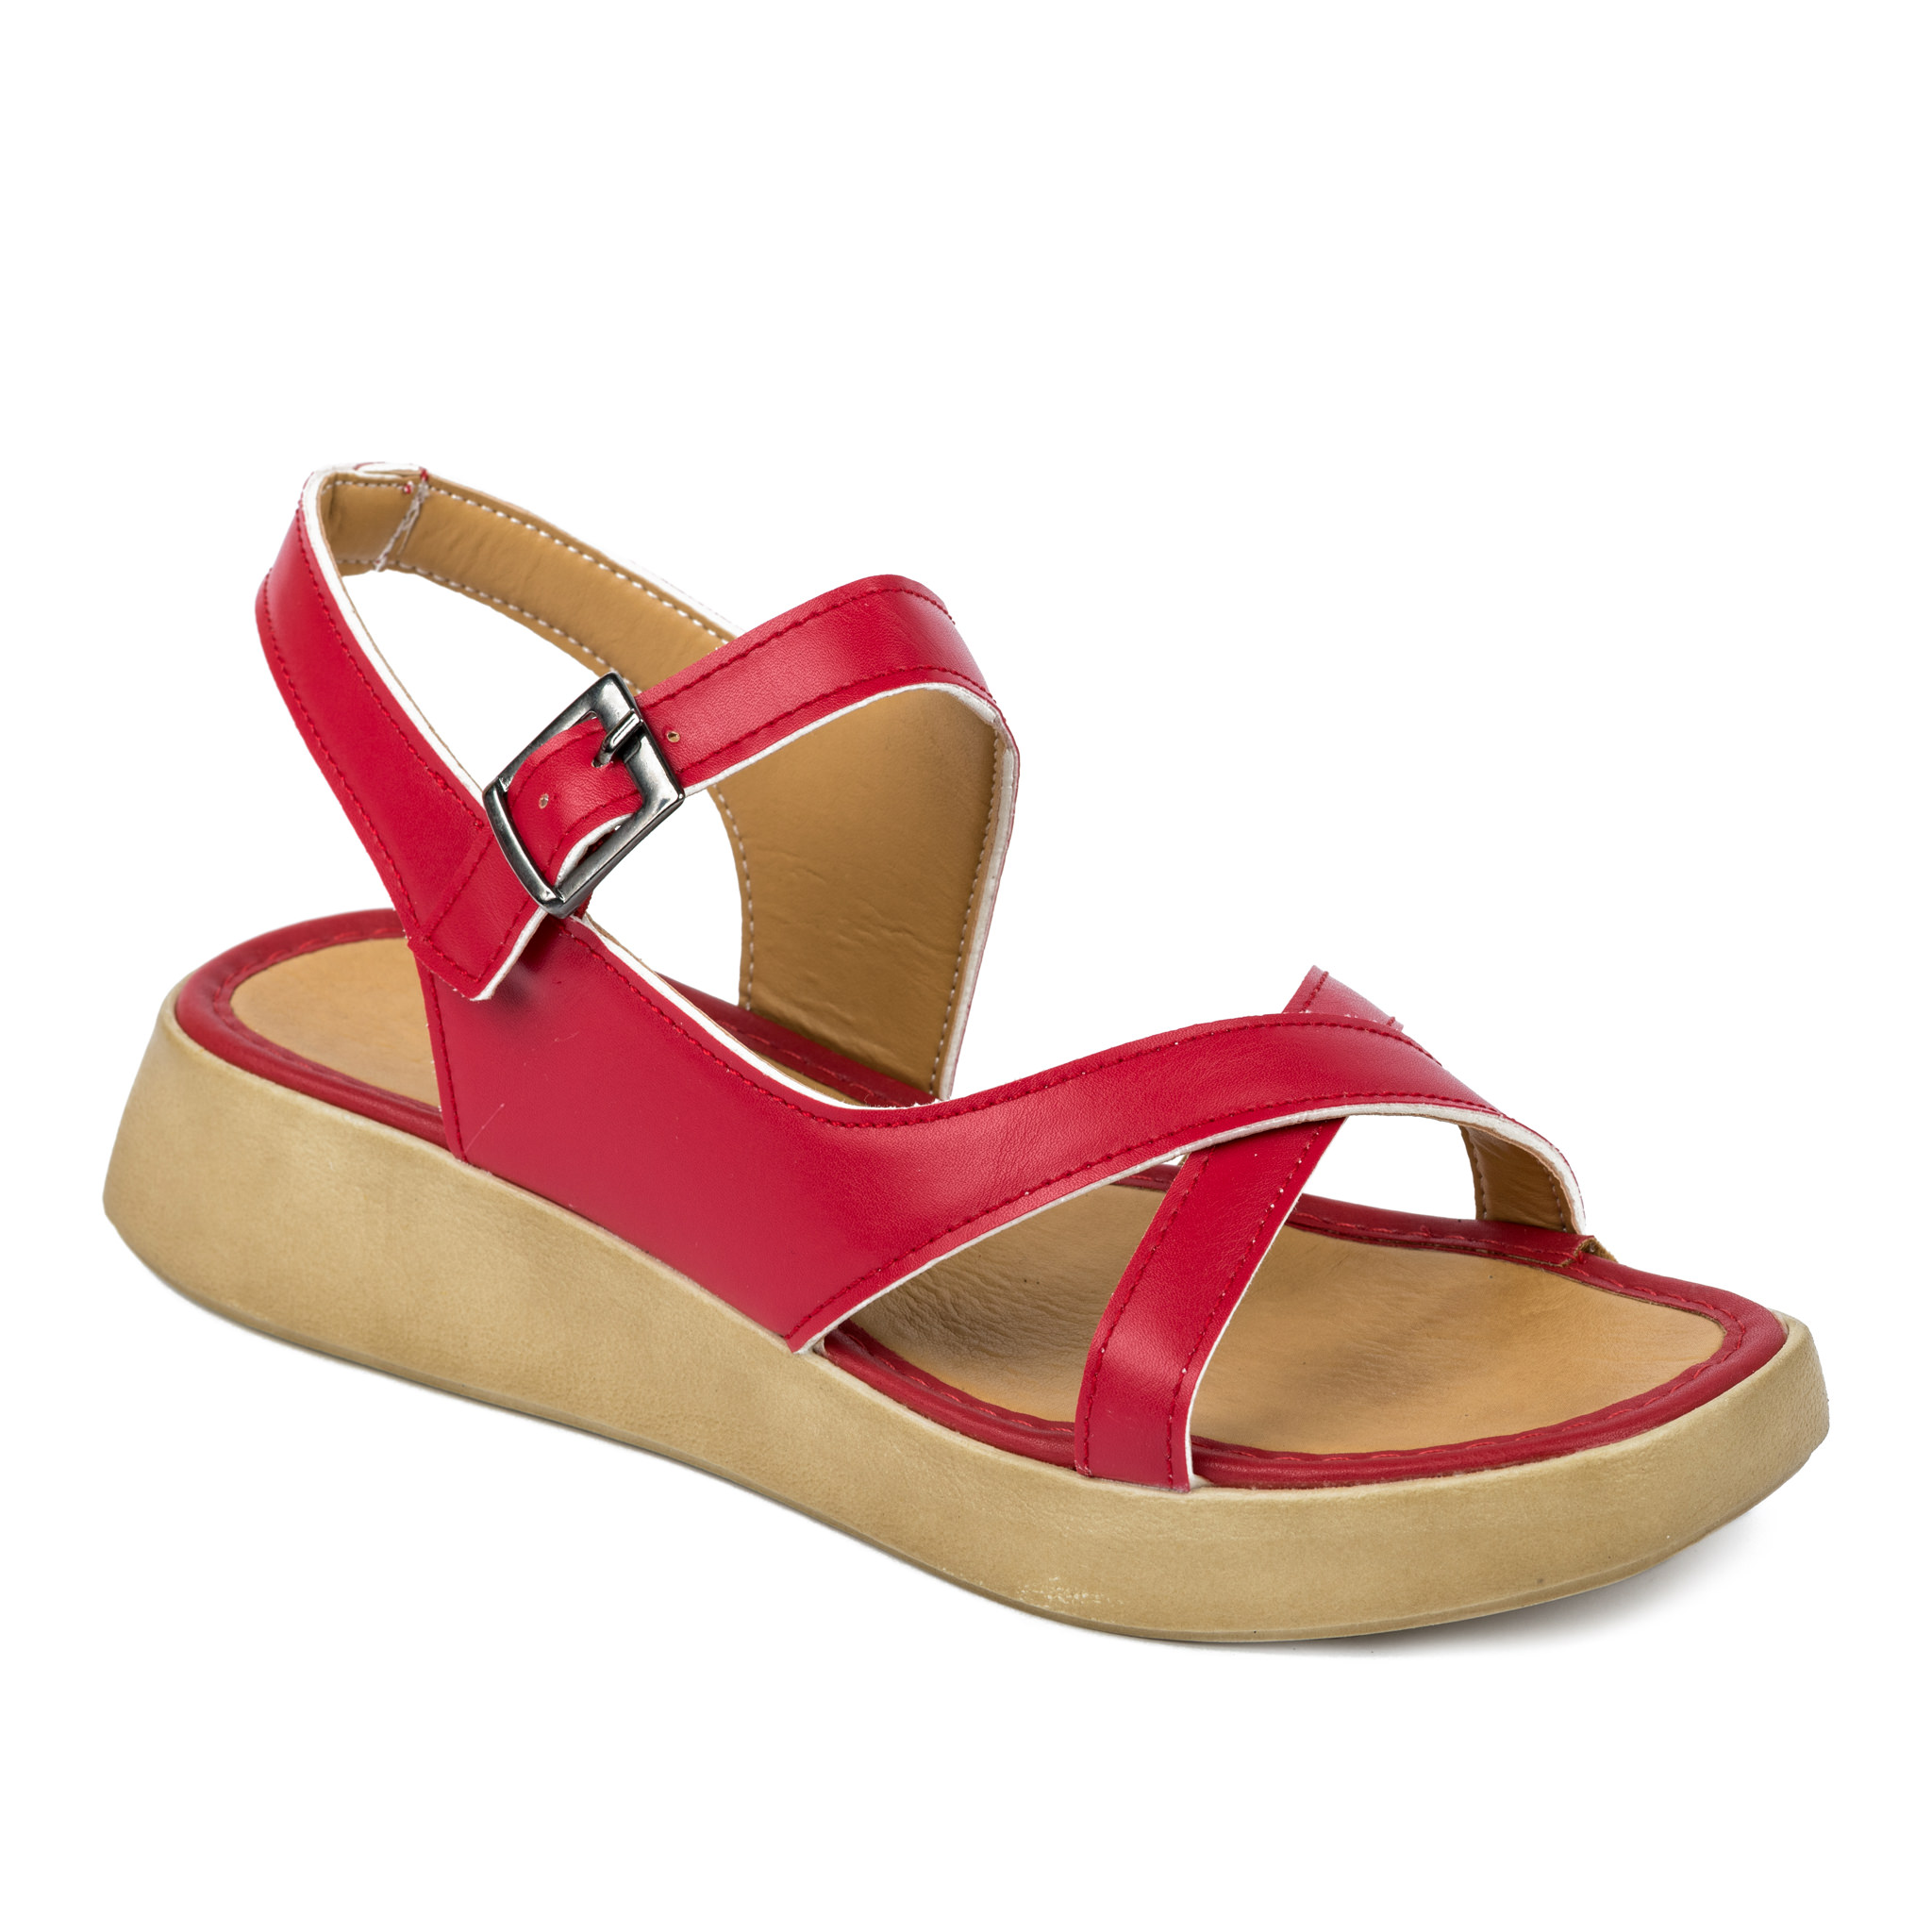 CROSS STRAP SANDALS WITH BELTS - RED